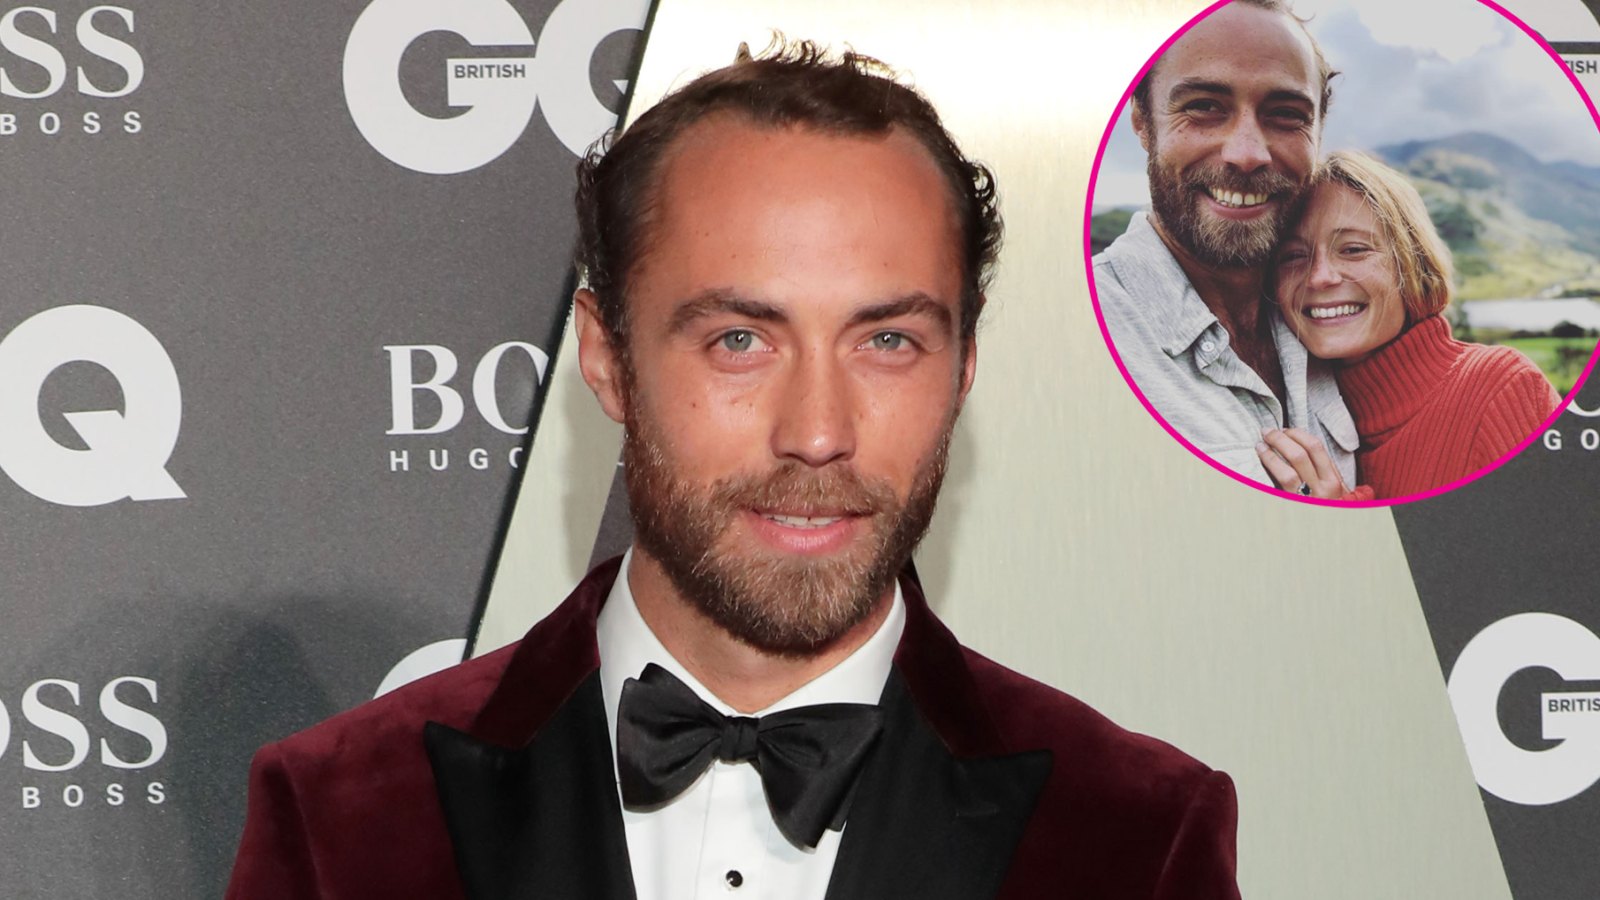 Kate Middleton-s Brother James Middleton Is Expecting 1st Baby With Wife Alizee Thevenet